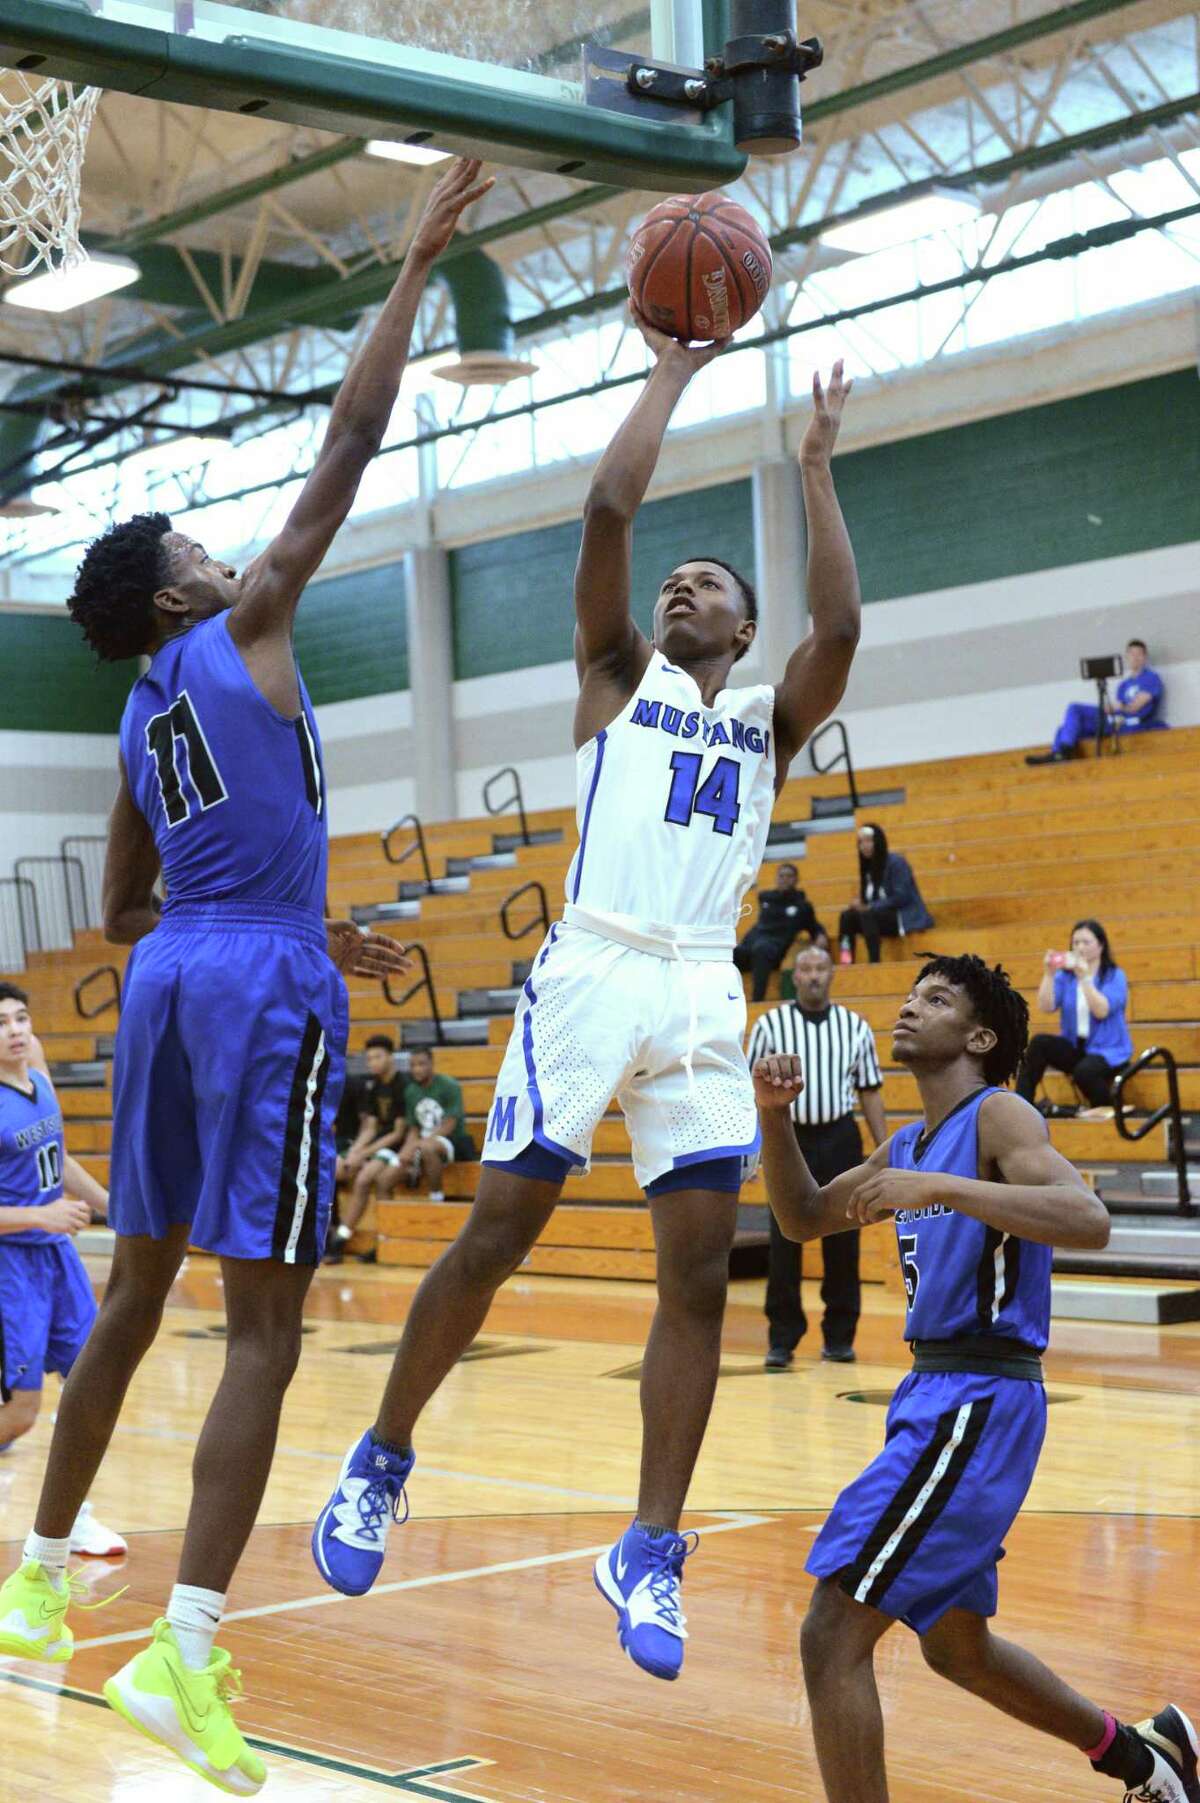 Angel Sonnier (14) of Taylor attempts a shot past Chinonso Ezekwesili (11) of Westside during the 2019 Katy Classic Basketball Tournament at Mayde Creek Hight School. Sonnier has played the last seasons at Mayde Creek, leading the Rams to an 18-6 start this year.